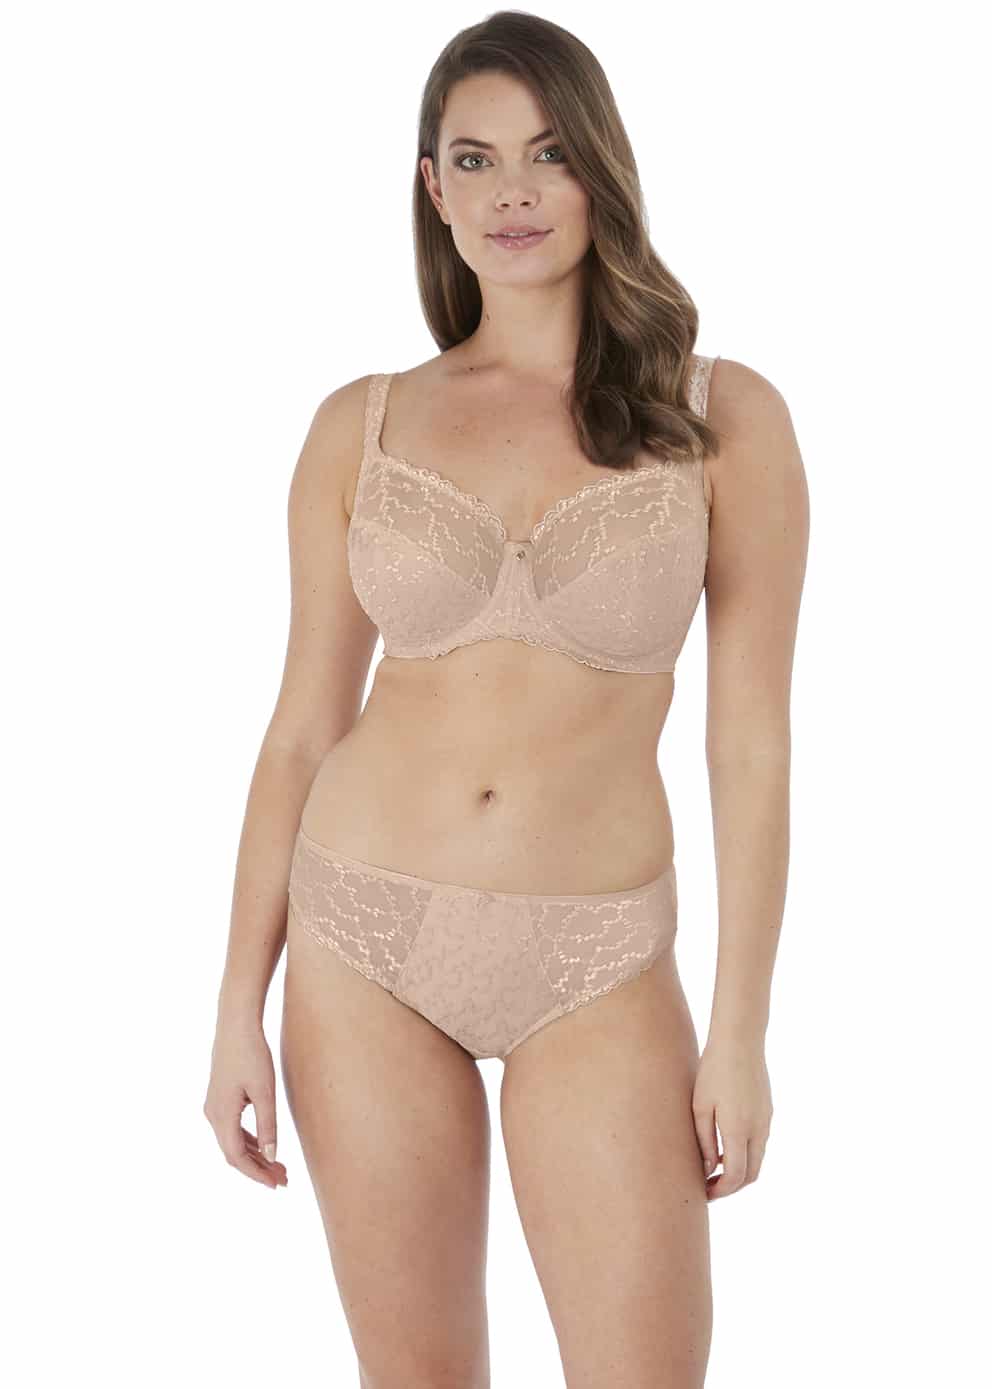 Ana White Padded Half Cup Bra from Fantasie